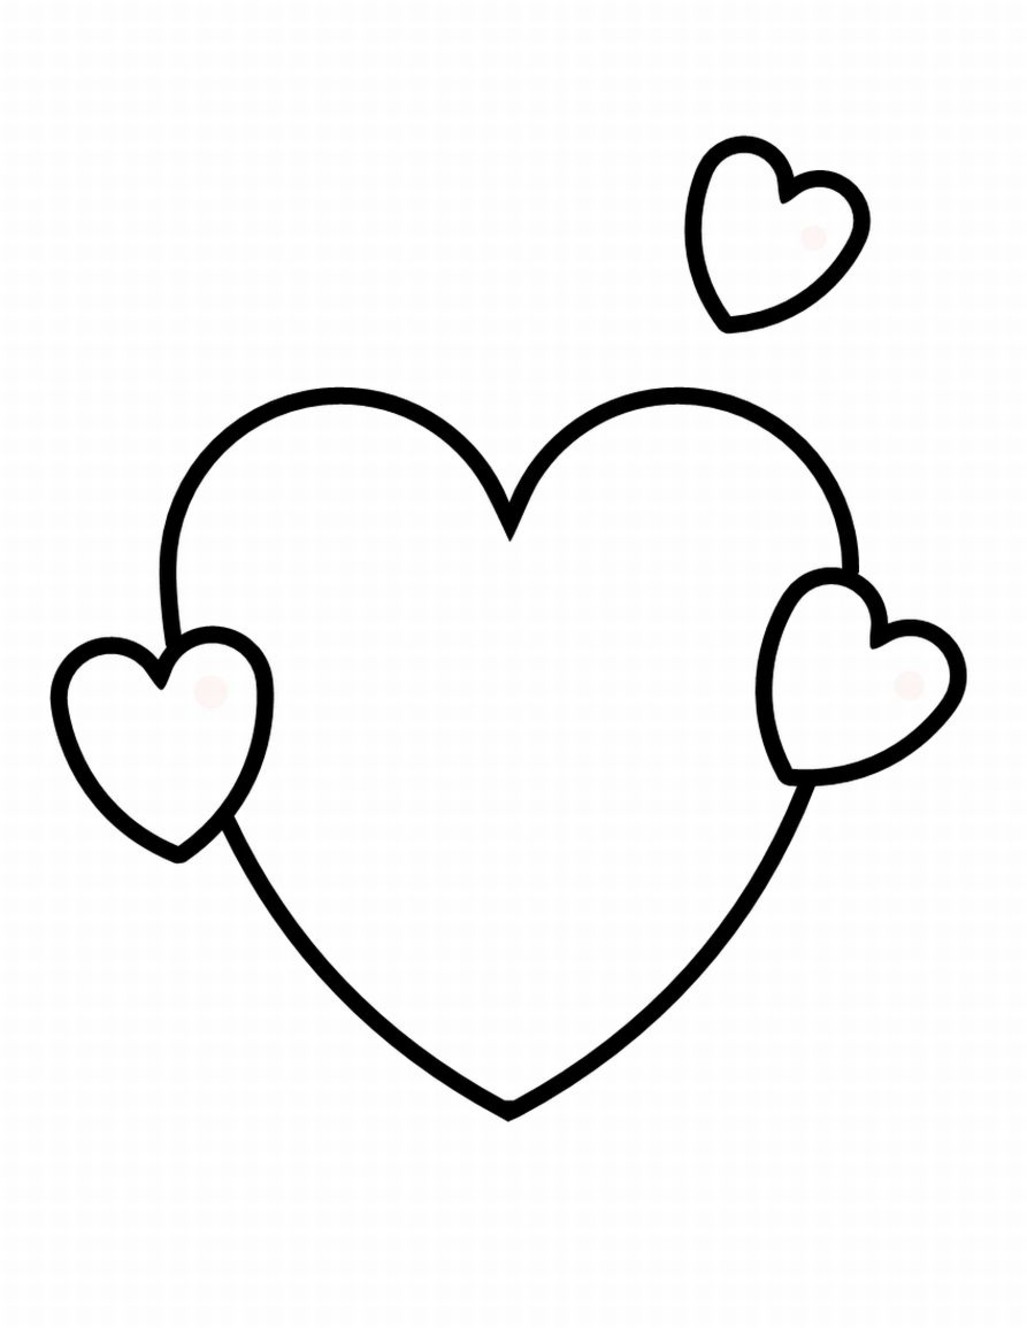 Hearts With Wings Coloring Page